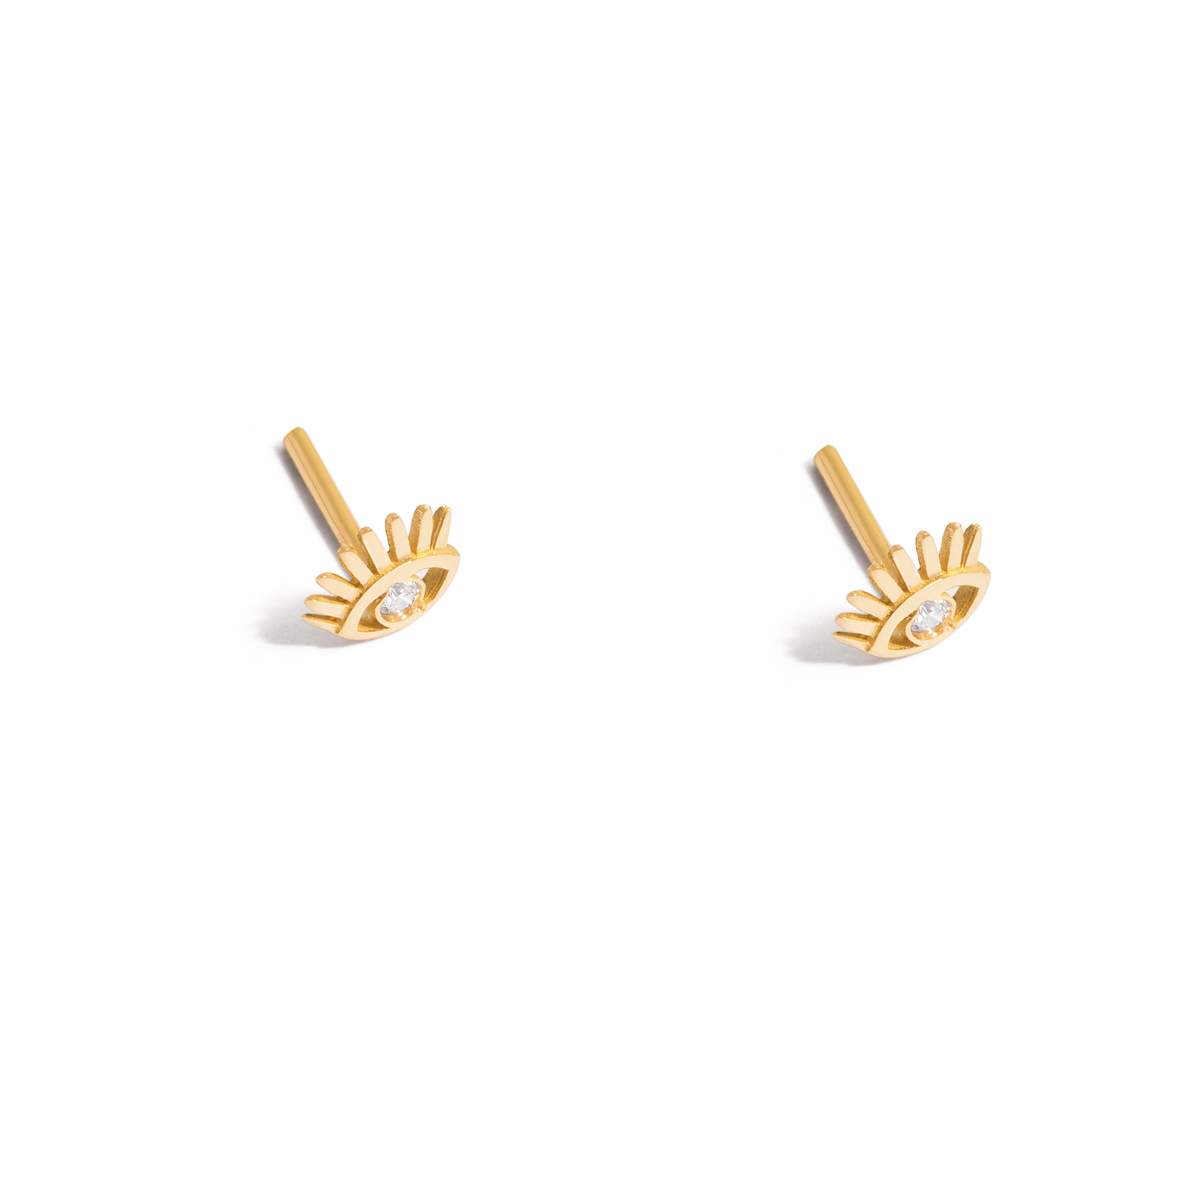 Gold earrings with a single gem g